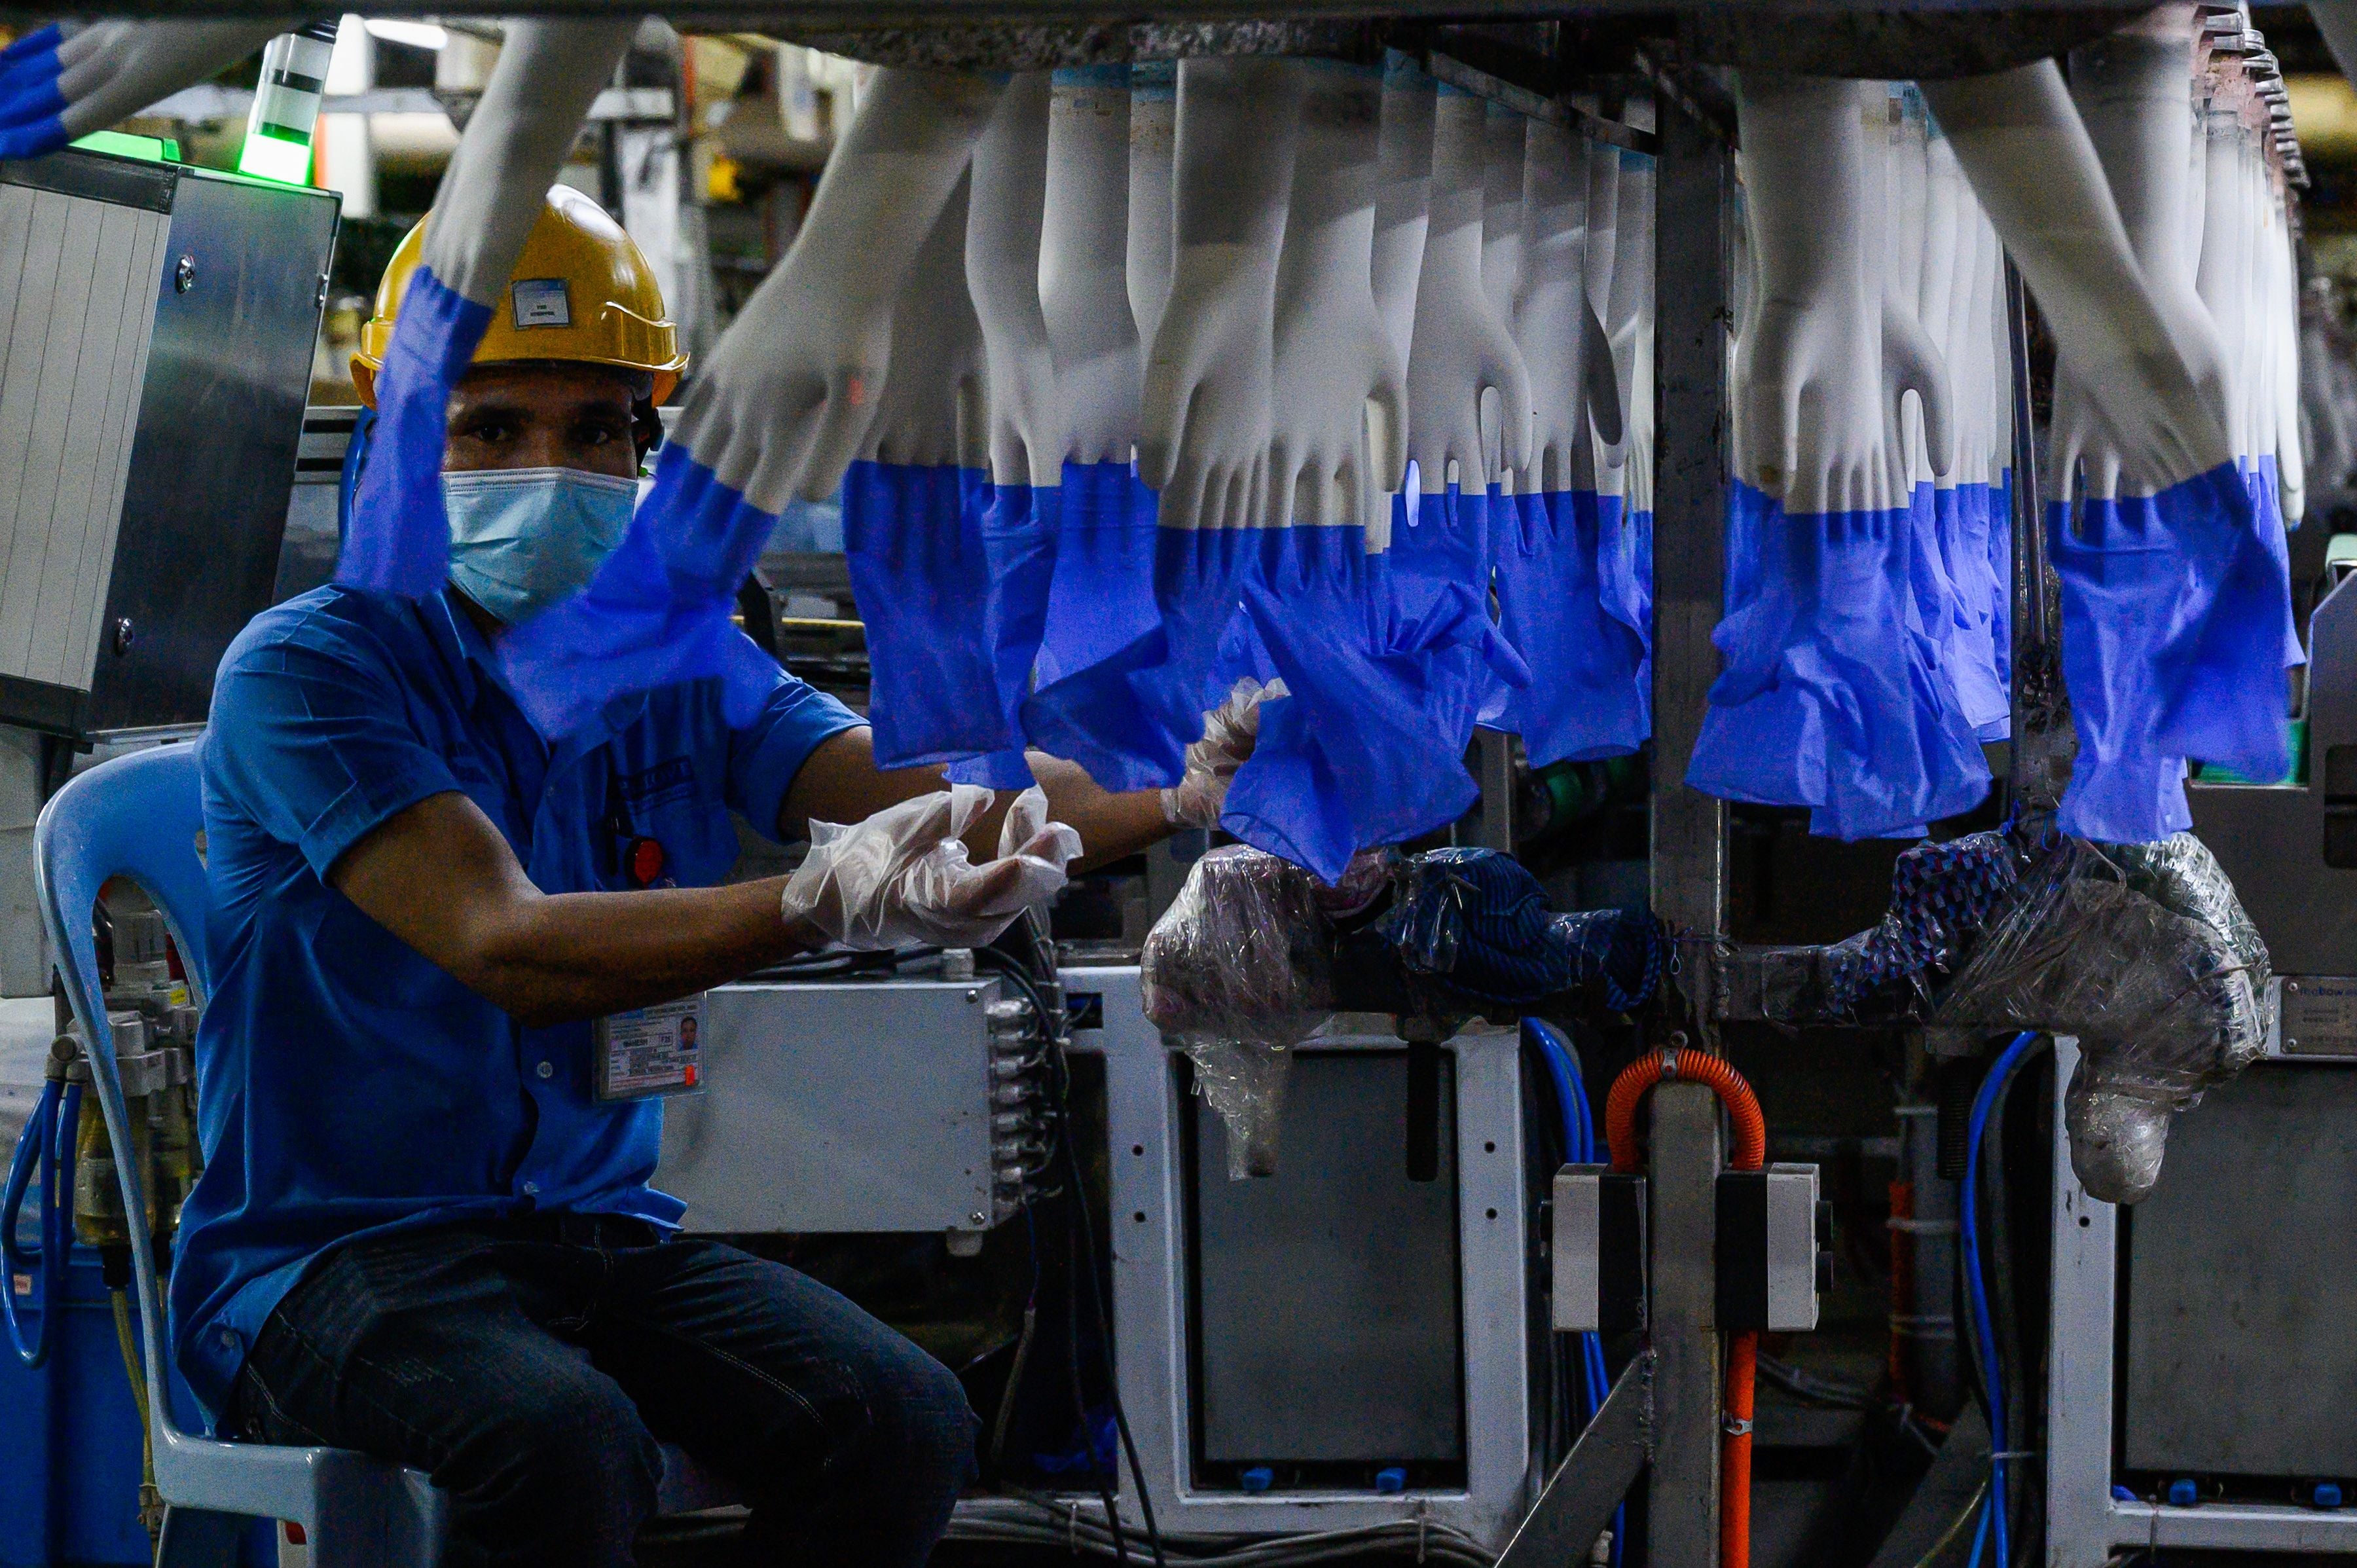 A worker inspects disposable gloves at the Top Glove factory in the outskirts of Kuala Lumpur